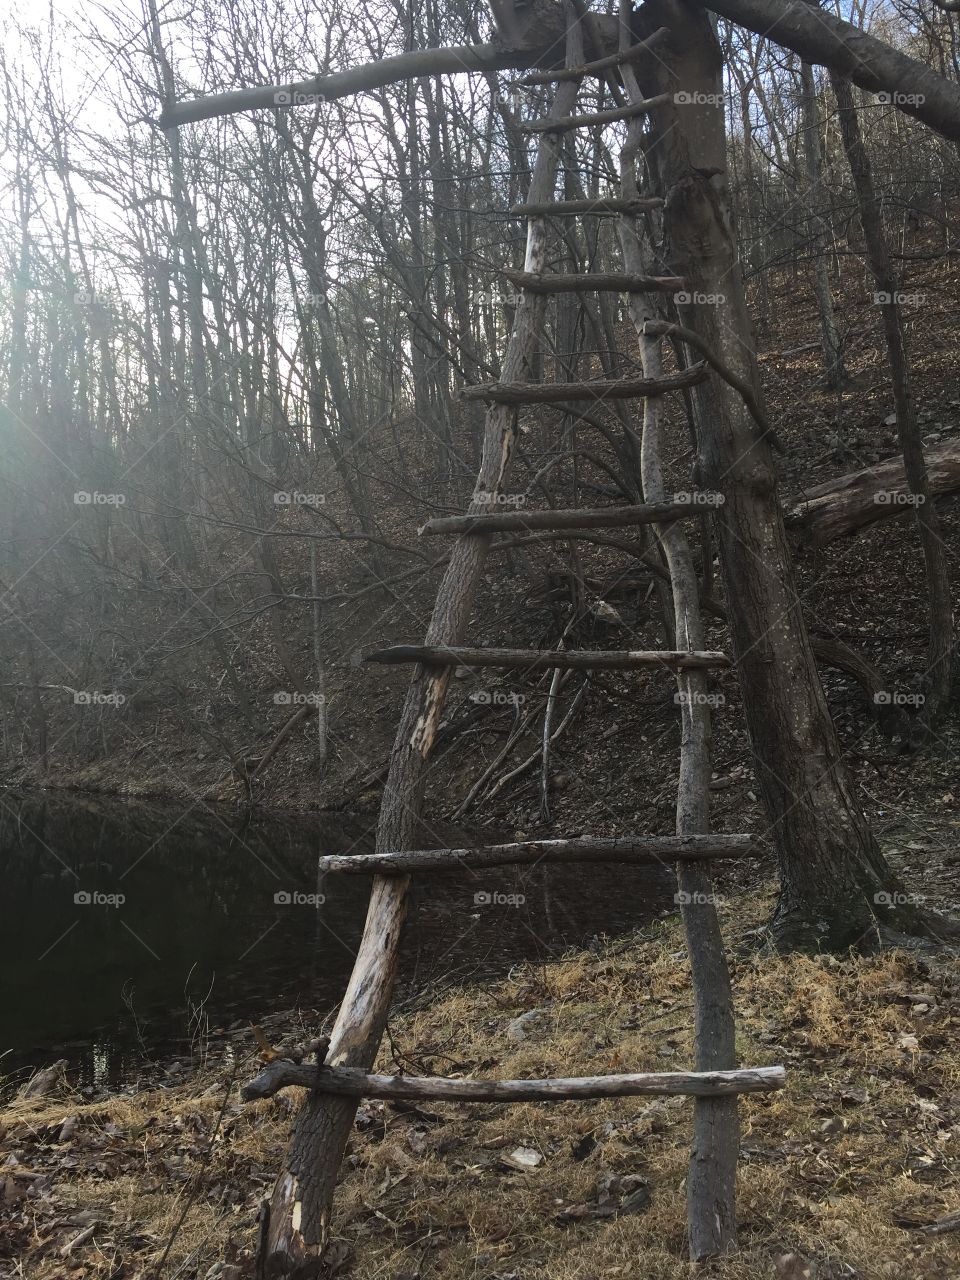 Ladder in the Woods